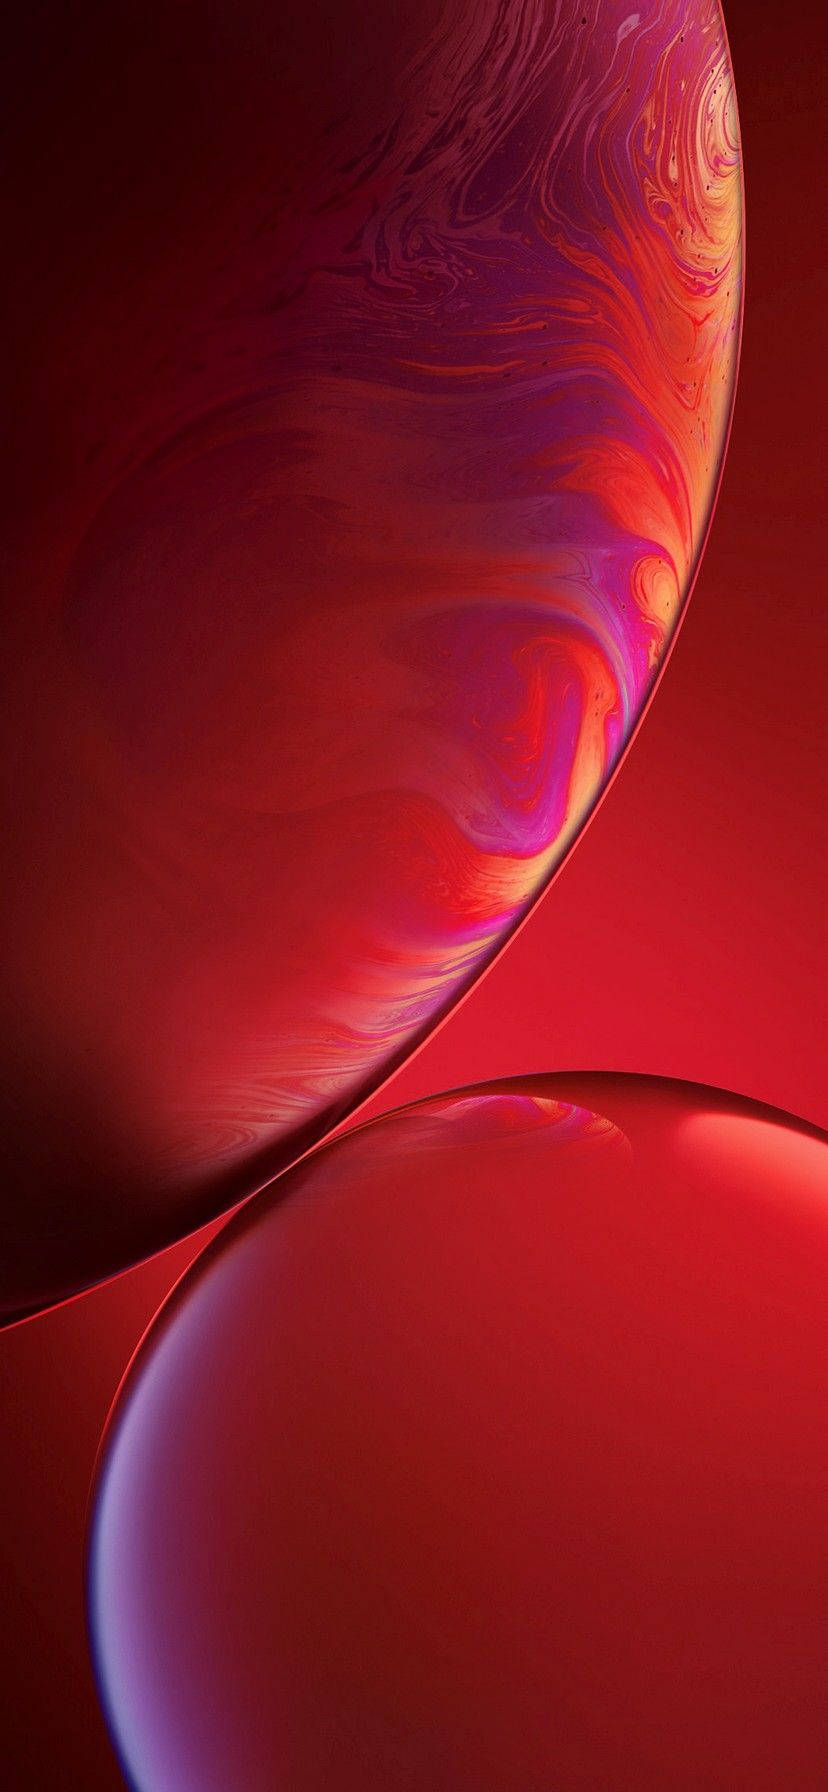 Iphone Xr Red Swirled Bubbles Wallpaper